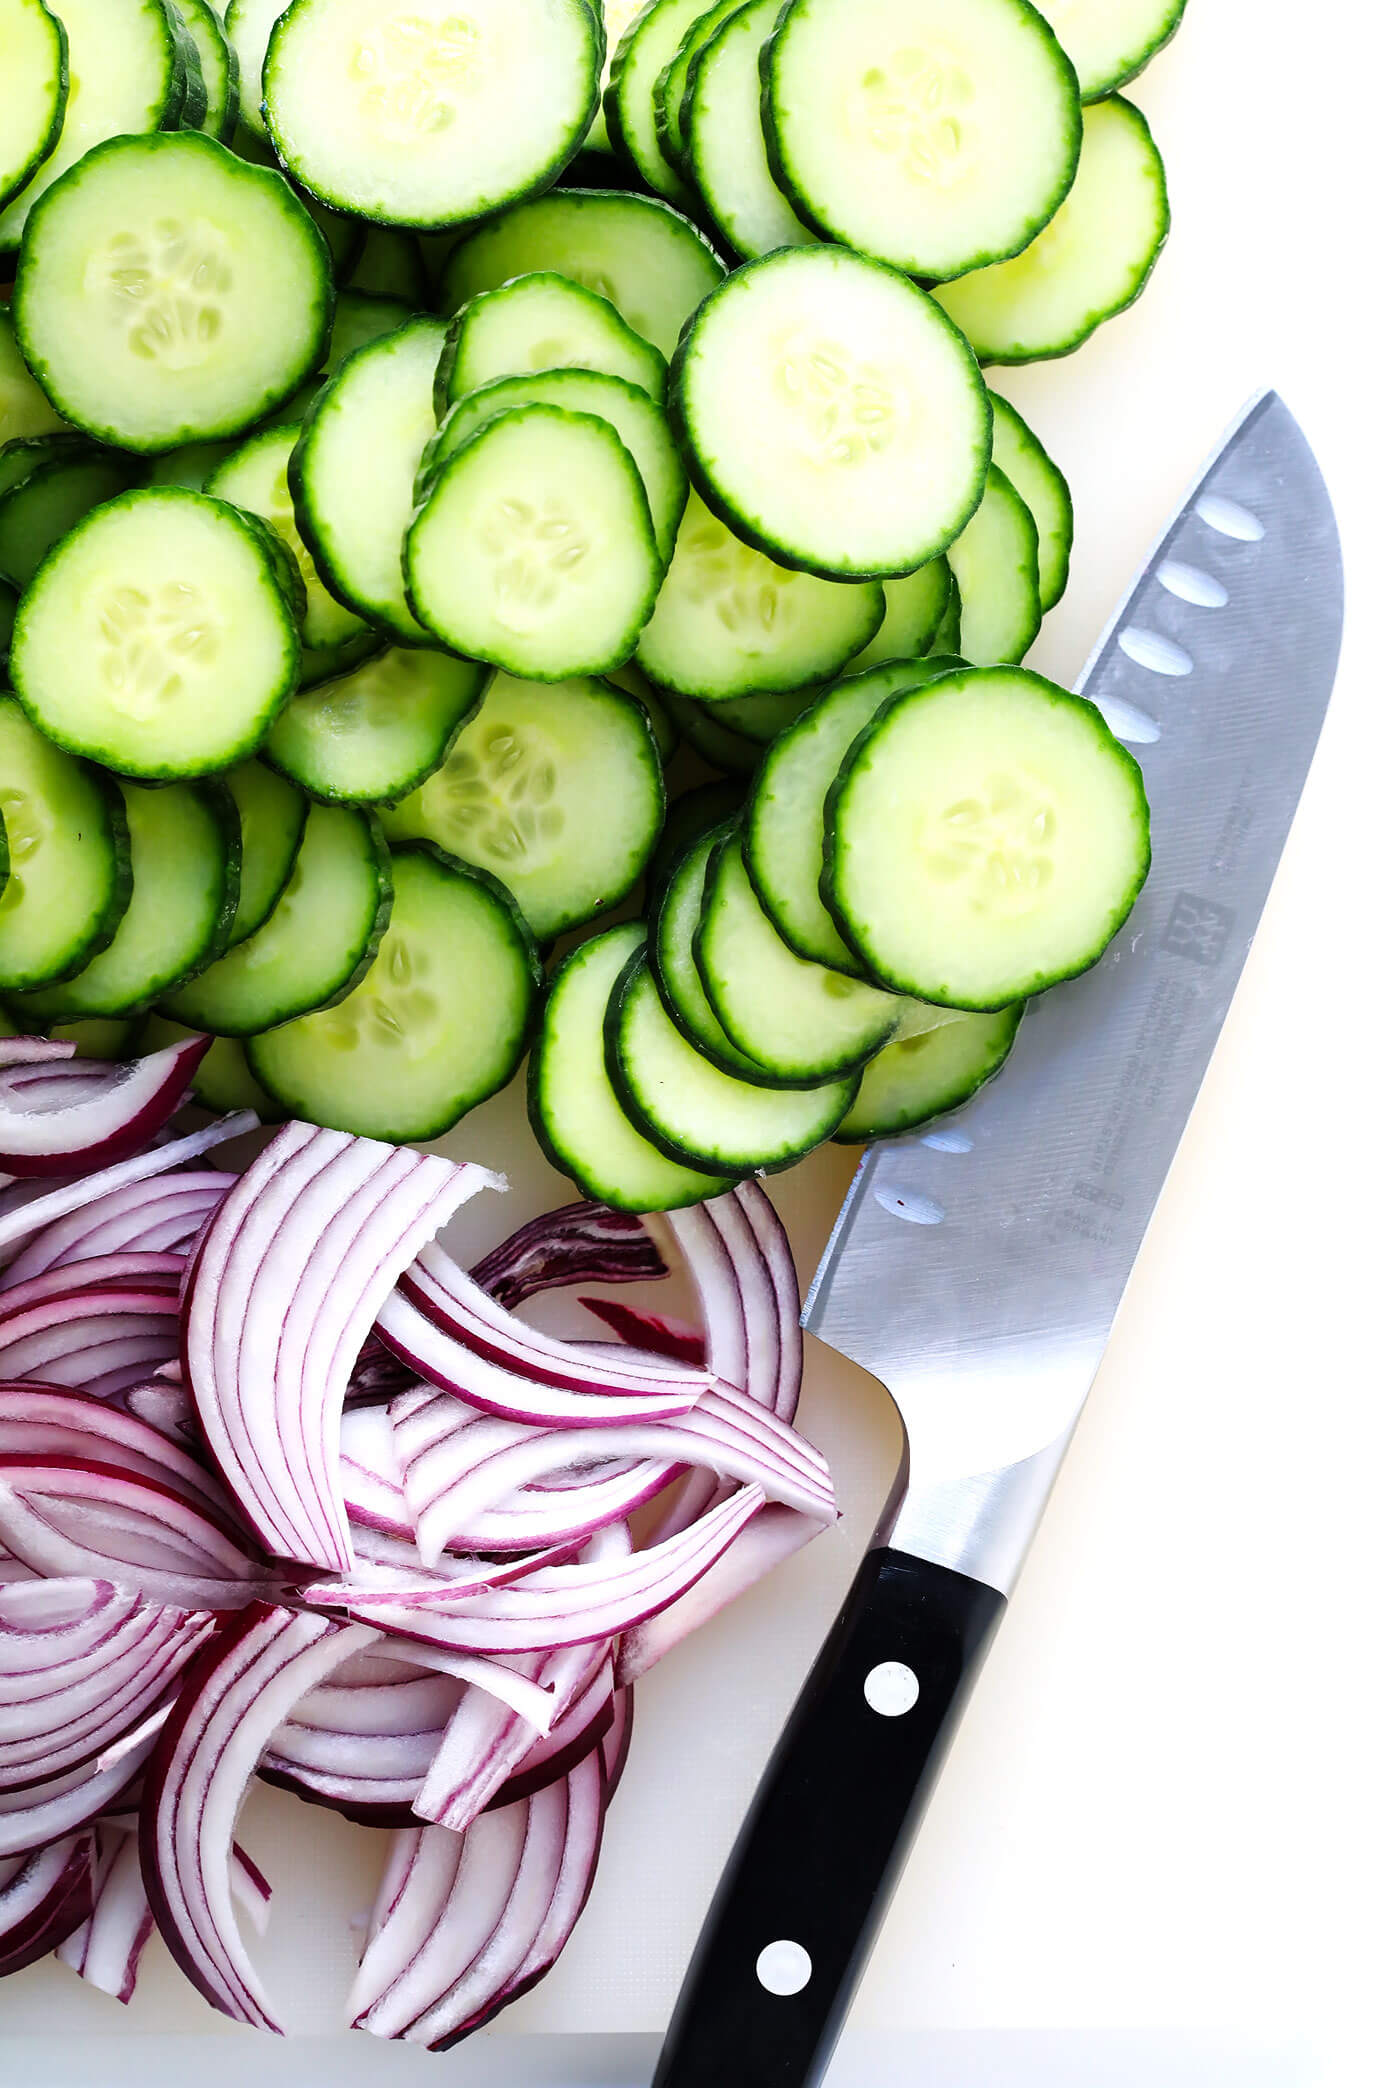 Slicing English cucumber and red onion to make a side salad